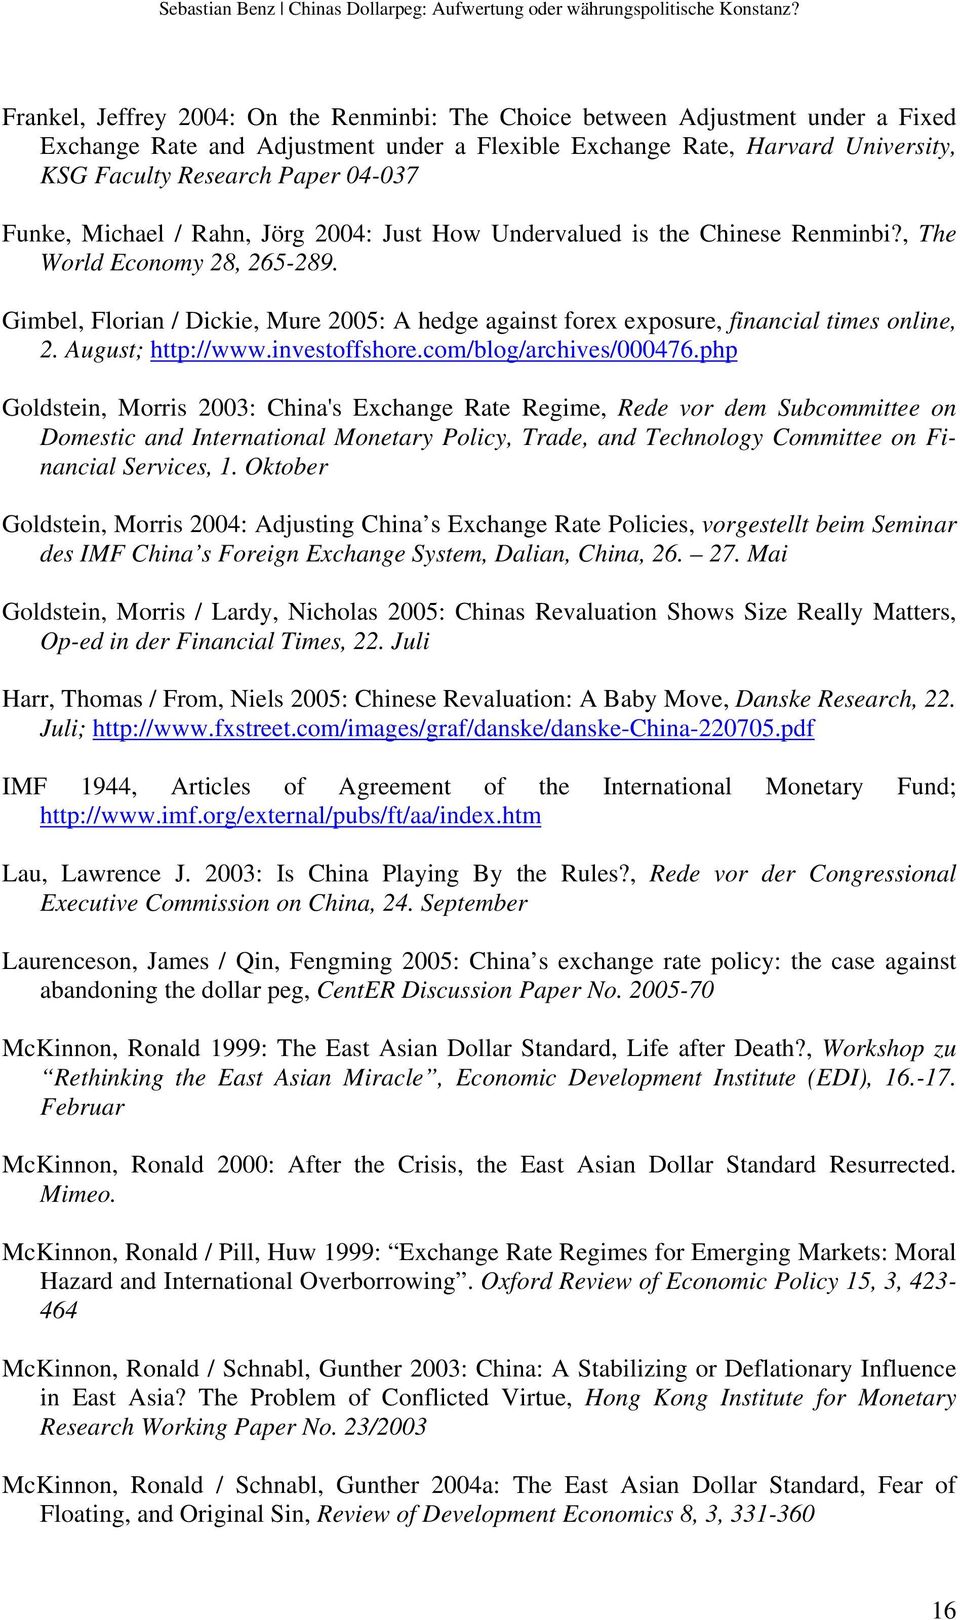 Gimbel, Florian / Dickie, Mure 2005: A hedge against forex exposure, financial times online, 2. August; http://www.investoffshore.com/blog/archives/000476.